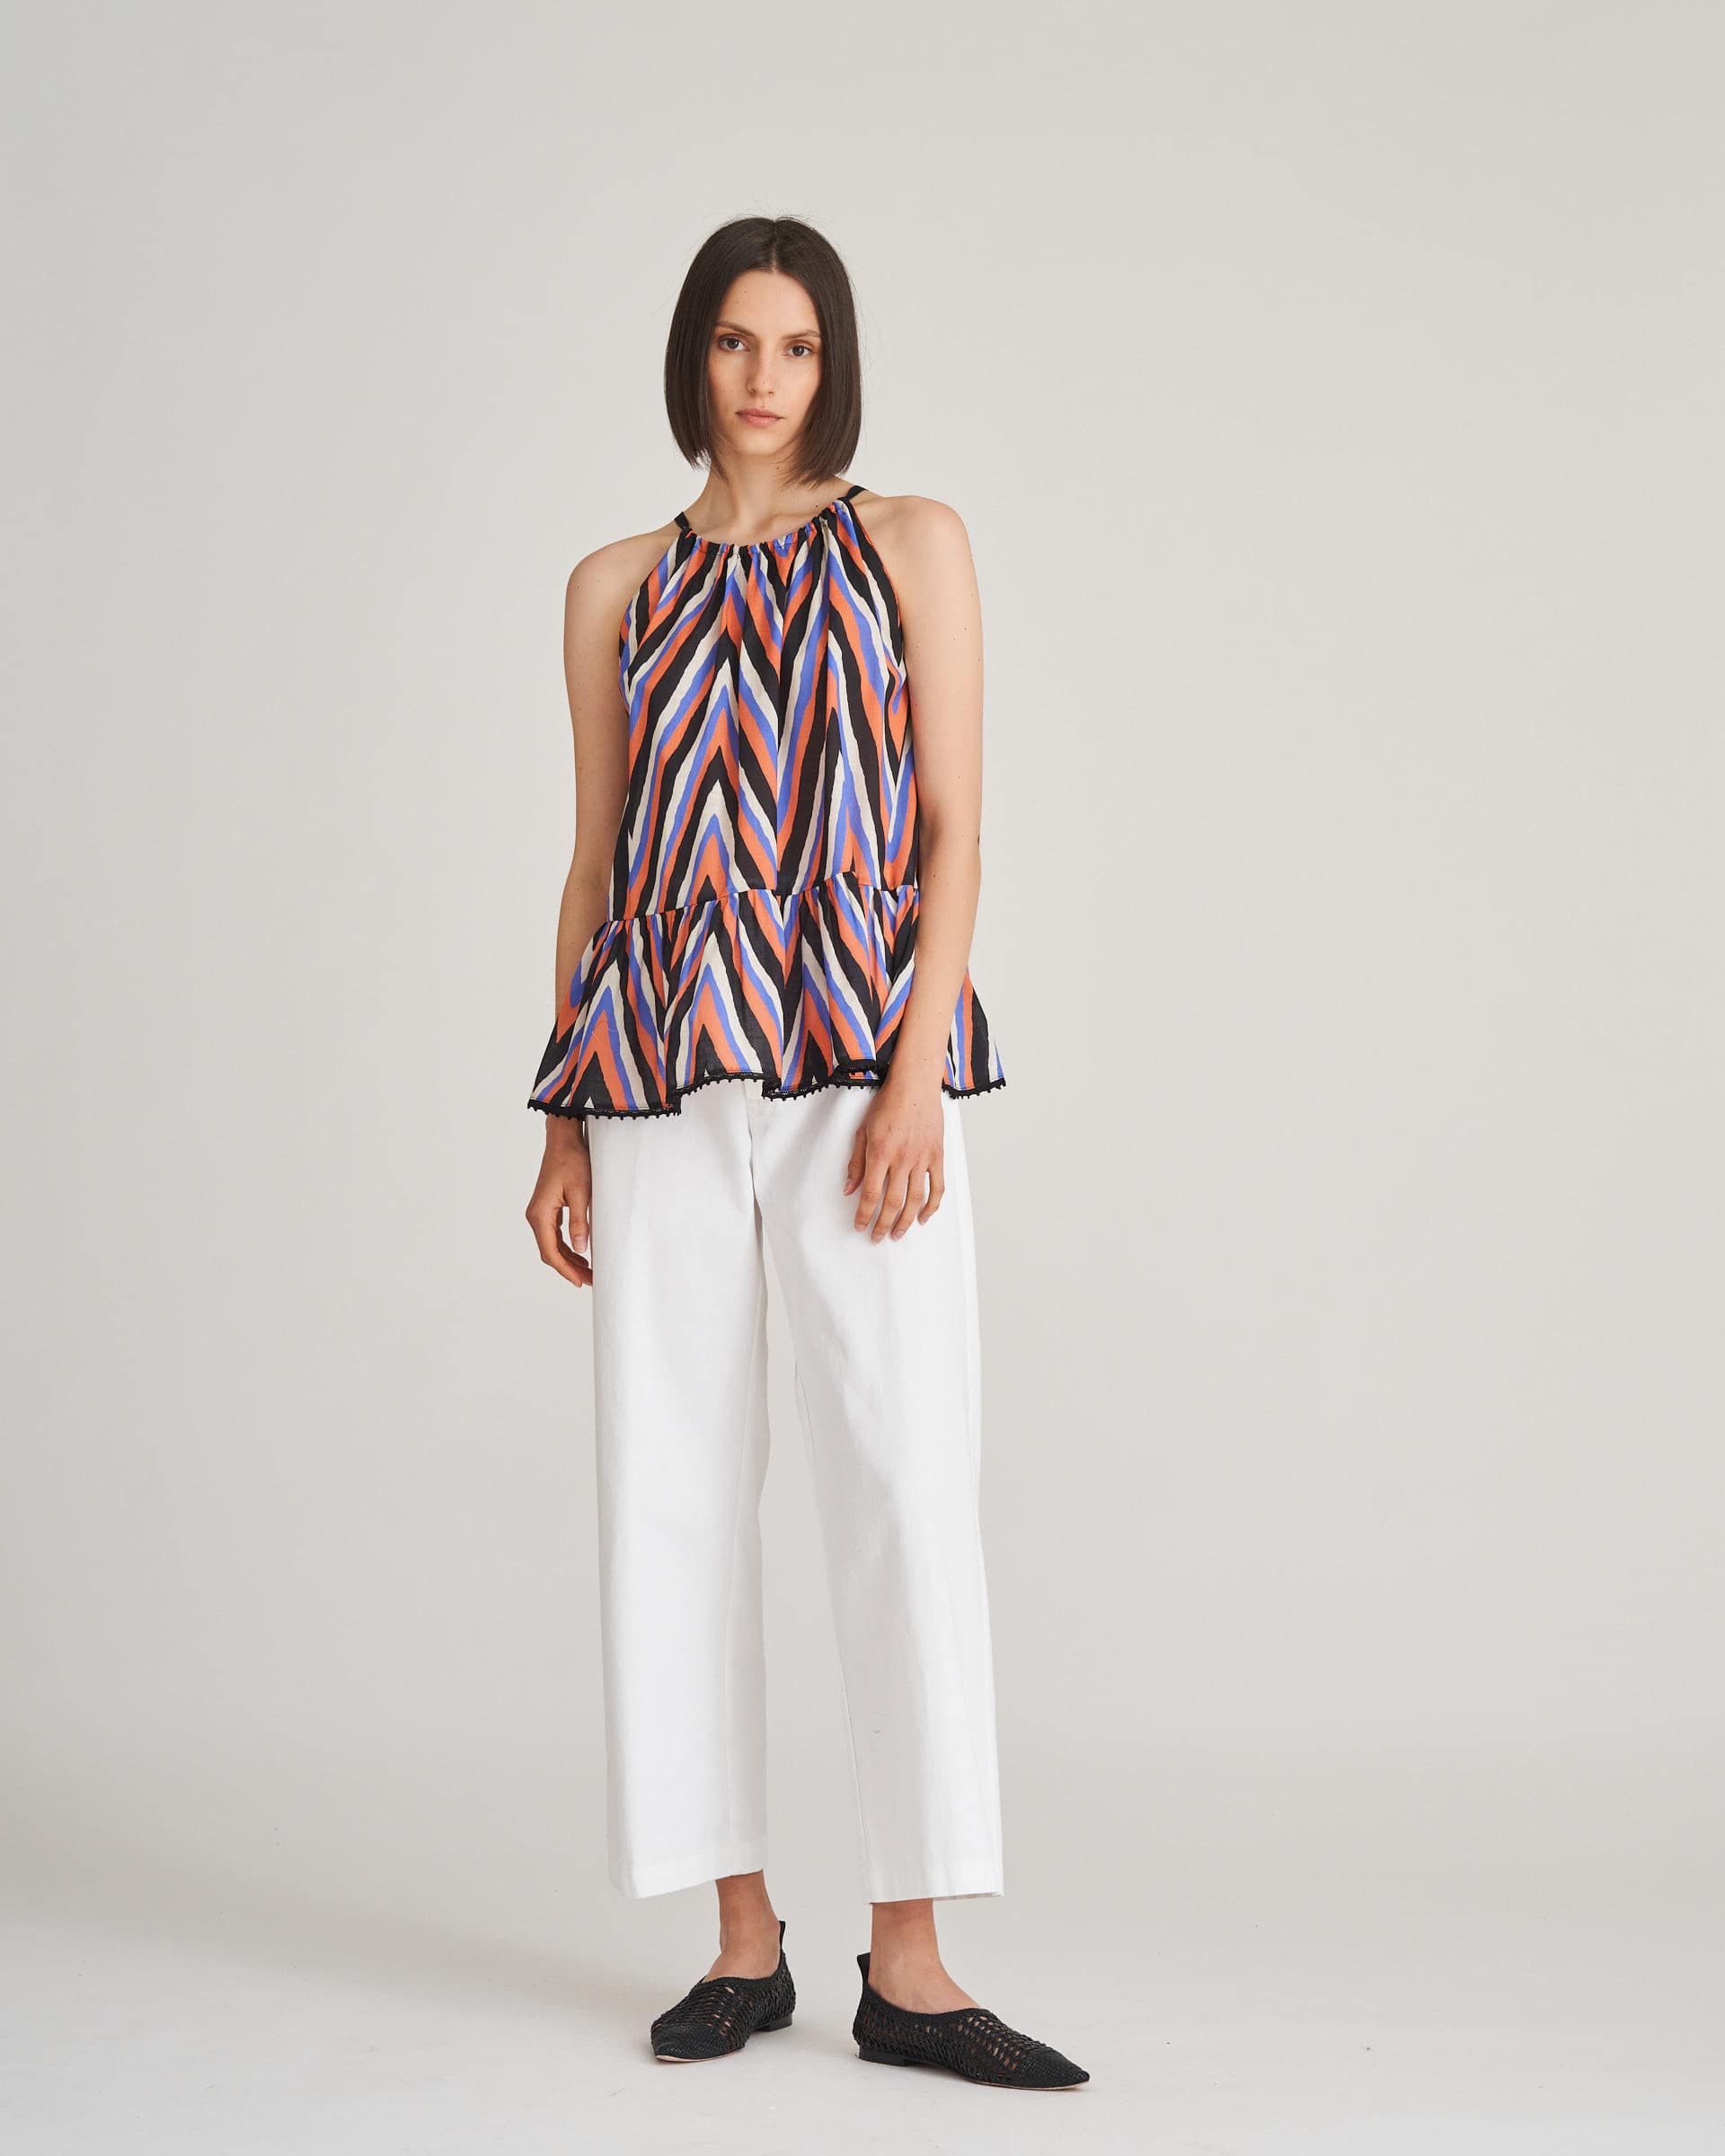 The Market Store | Patterned Sleeveless Top